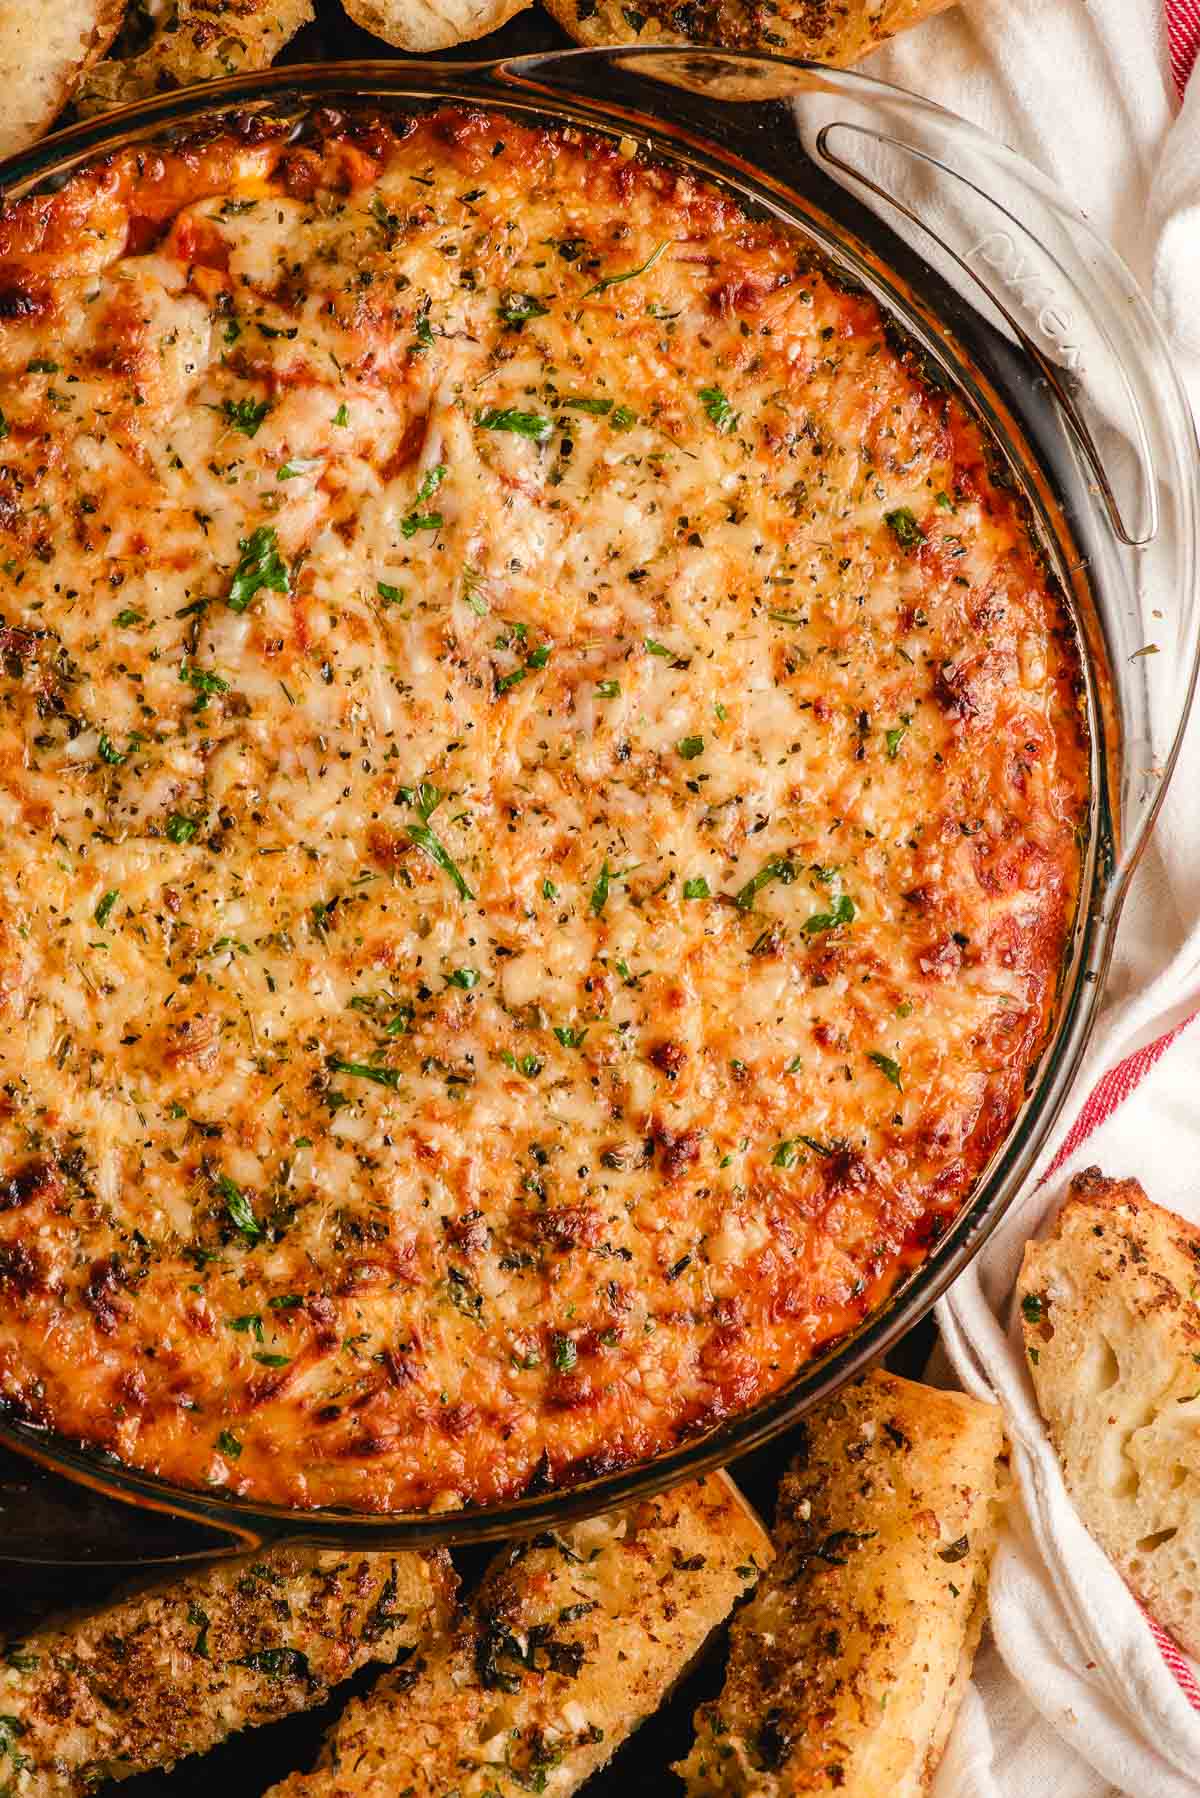 Ultra cheesy baked lasagna dip surrounded by garlic bread dippers.